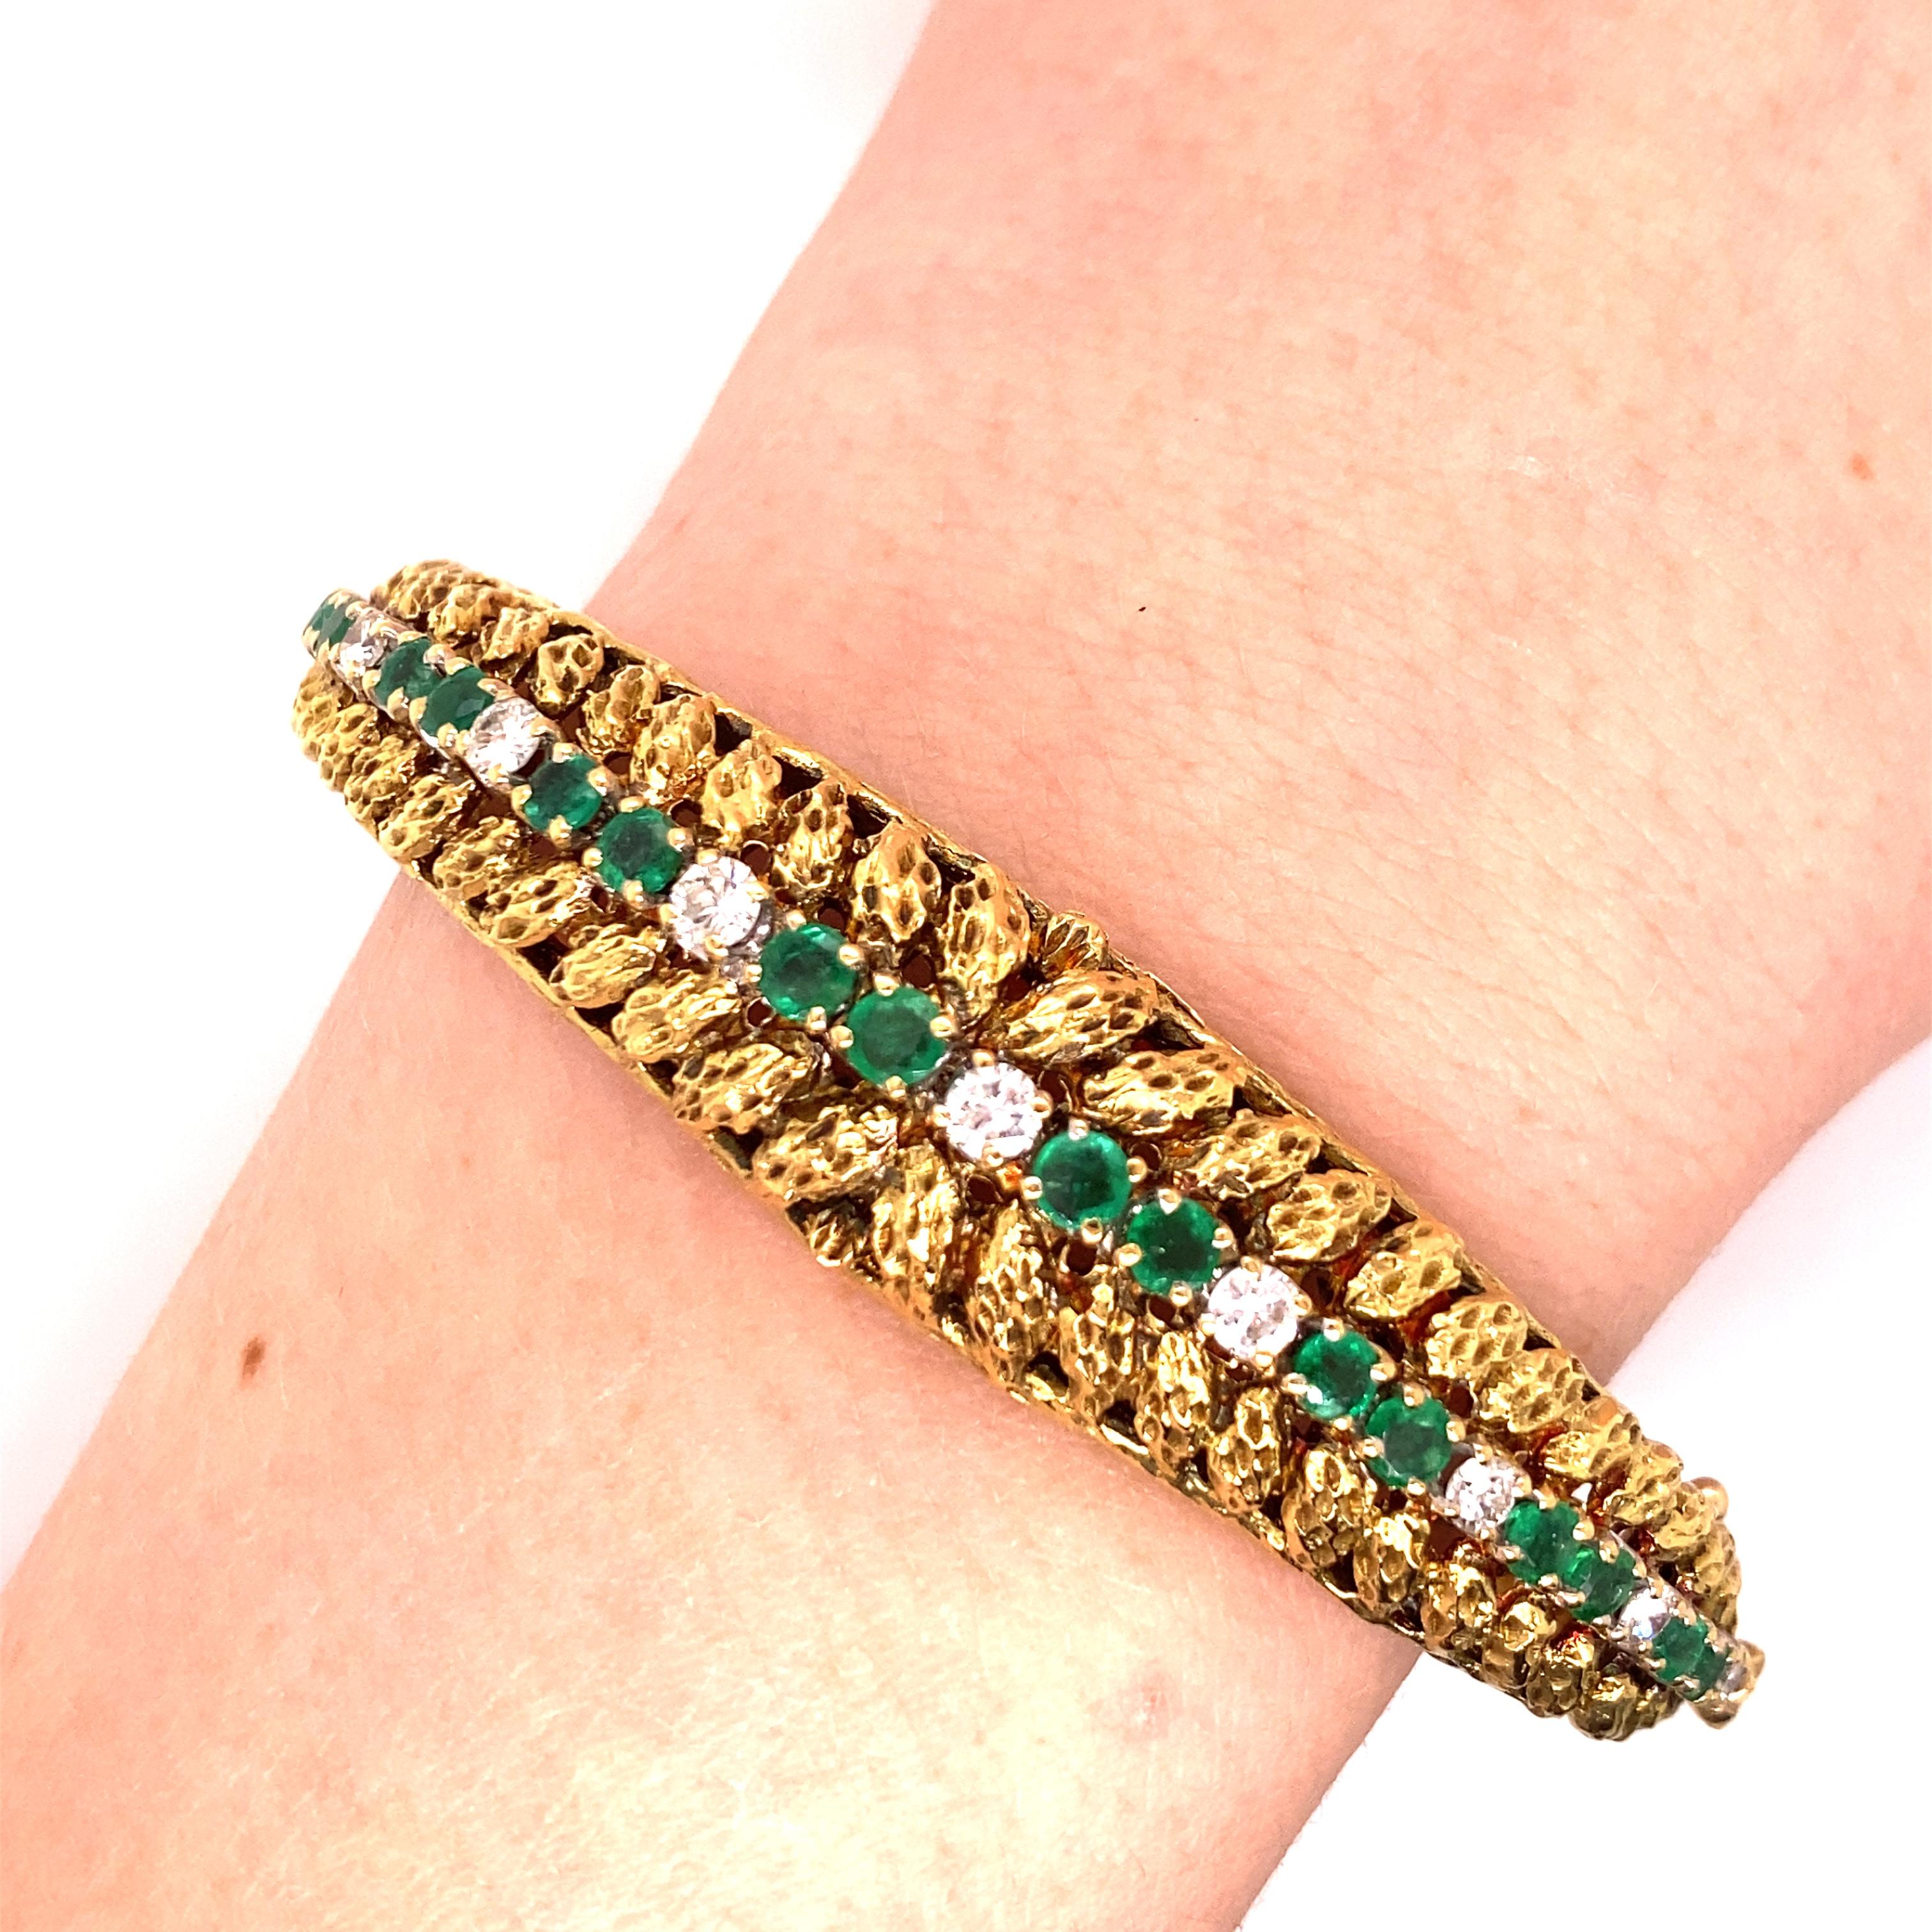 Vintage 1980's 18K Yellow Gold Emerald and Diamond Bangle - There are 19 round emeralds graduated in size with a total approximate weight of 1.62ct and very fine green color. There are 10 round brilliant diamonds with a total approximate weight of